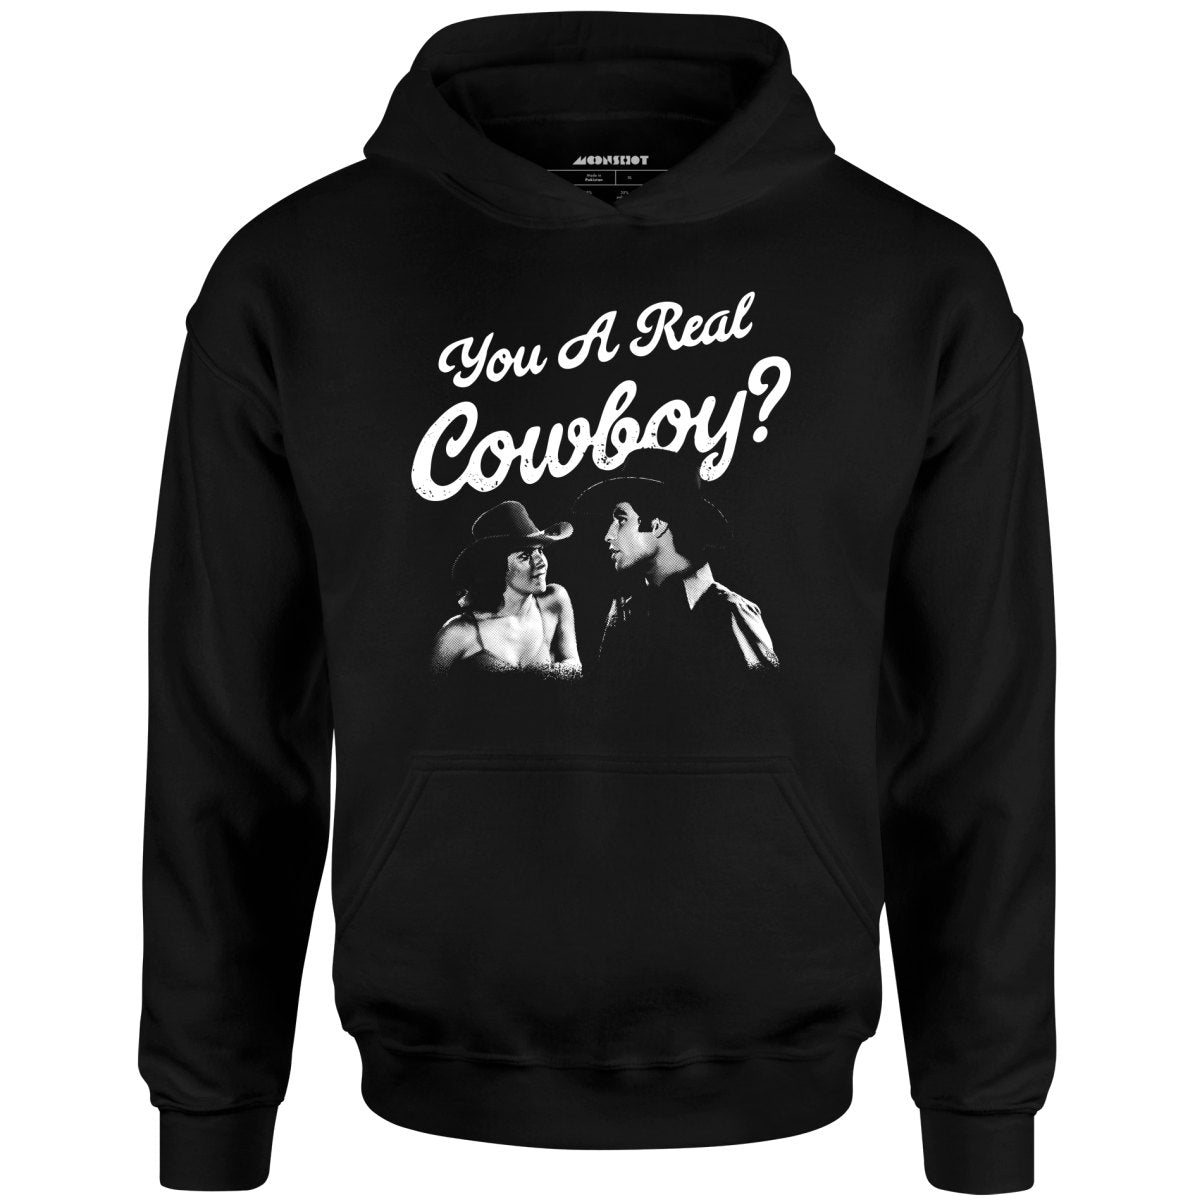 You a Real Cowboy? - Unisex Hoodie